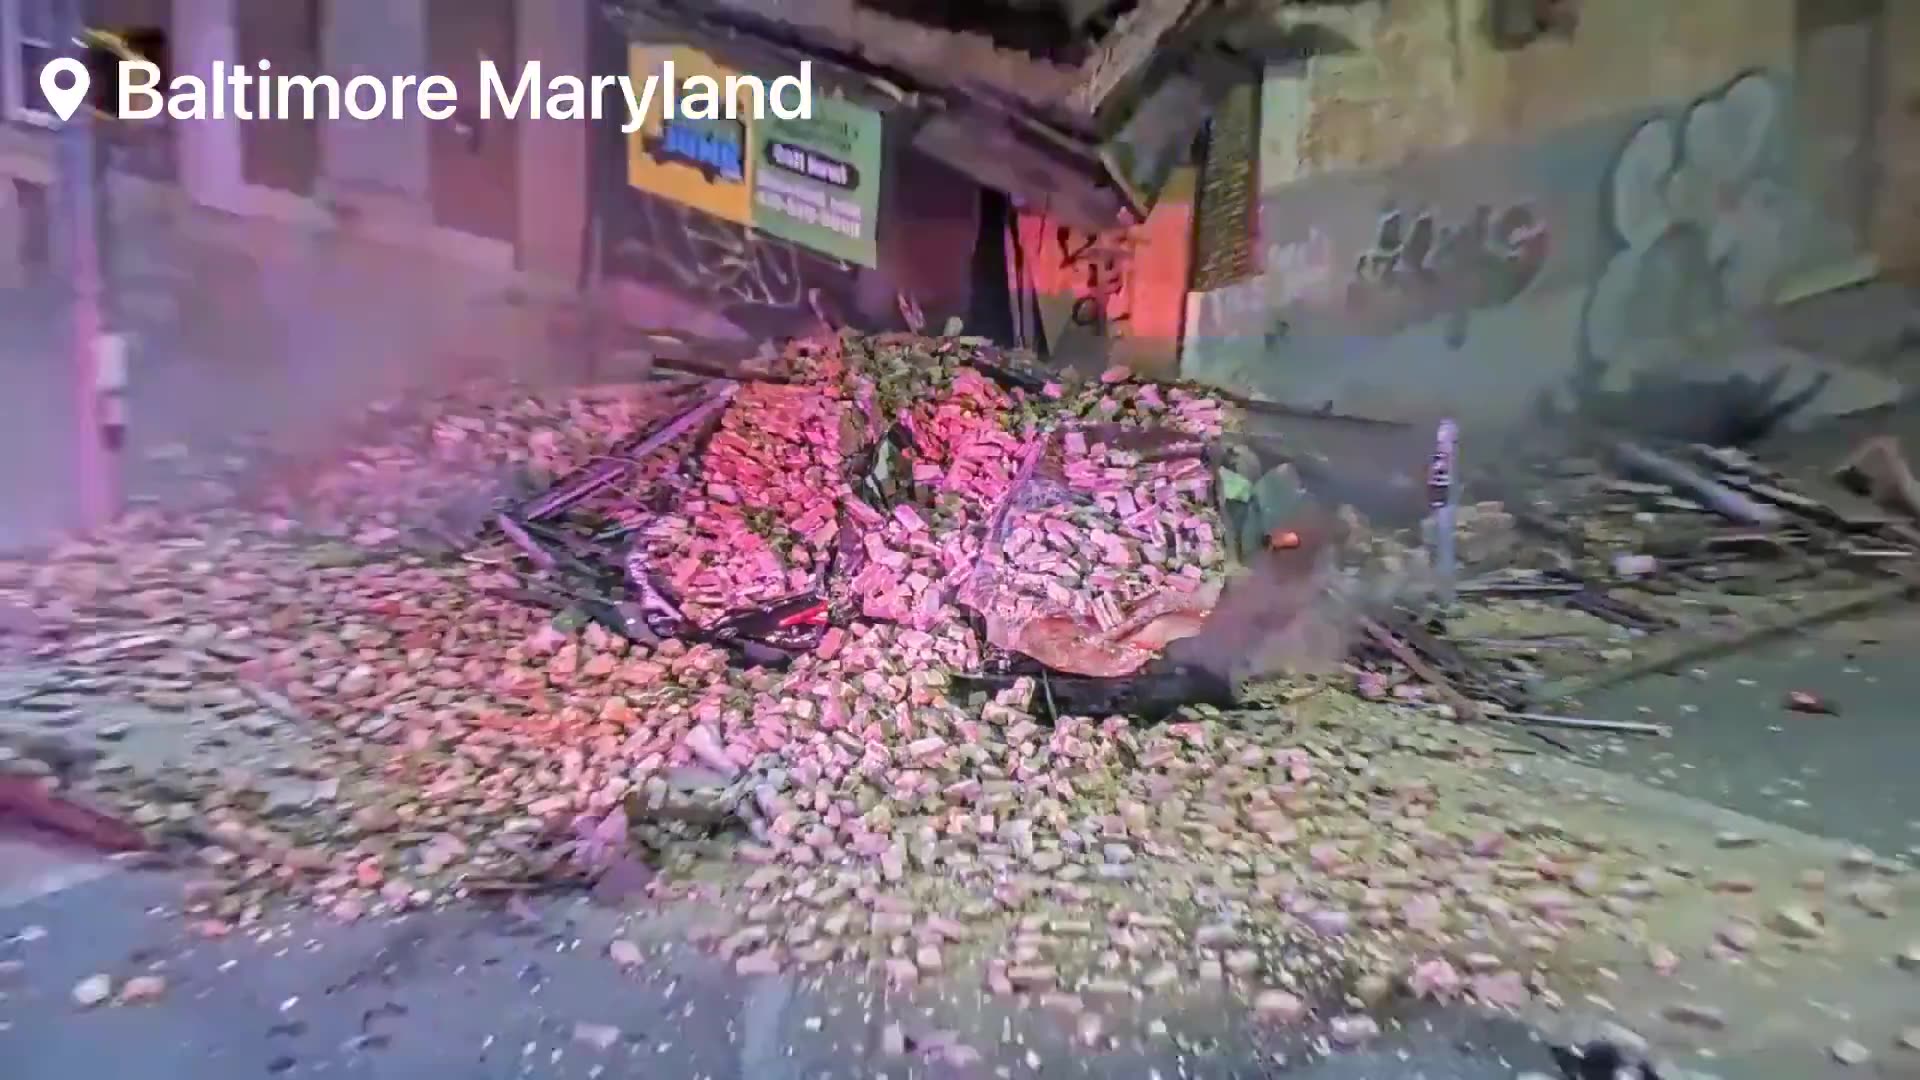 Stolen vehicle suspect leads police on chase that results in crash and collapsed building [VIDEO]